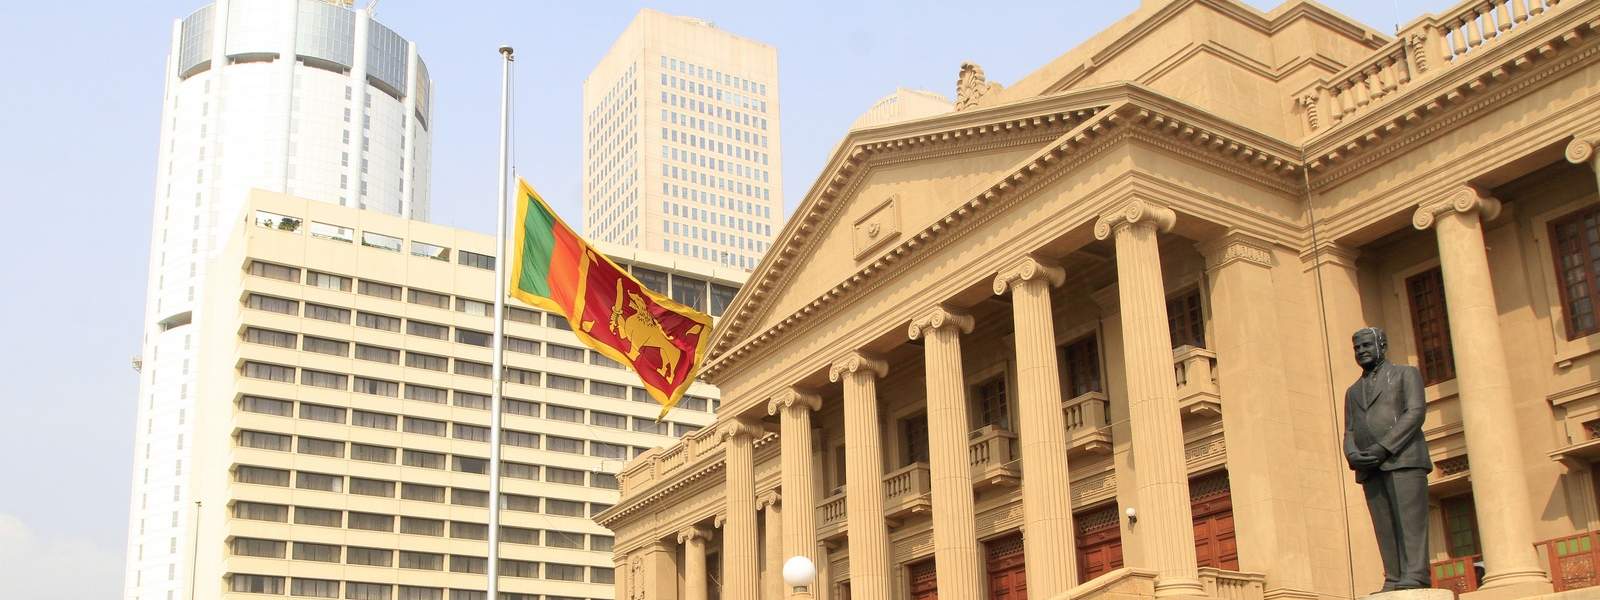 National Flag will be flown at half-mast